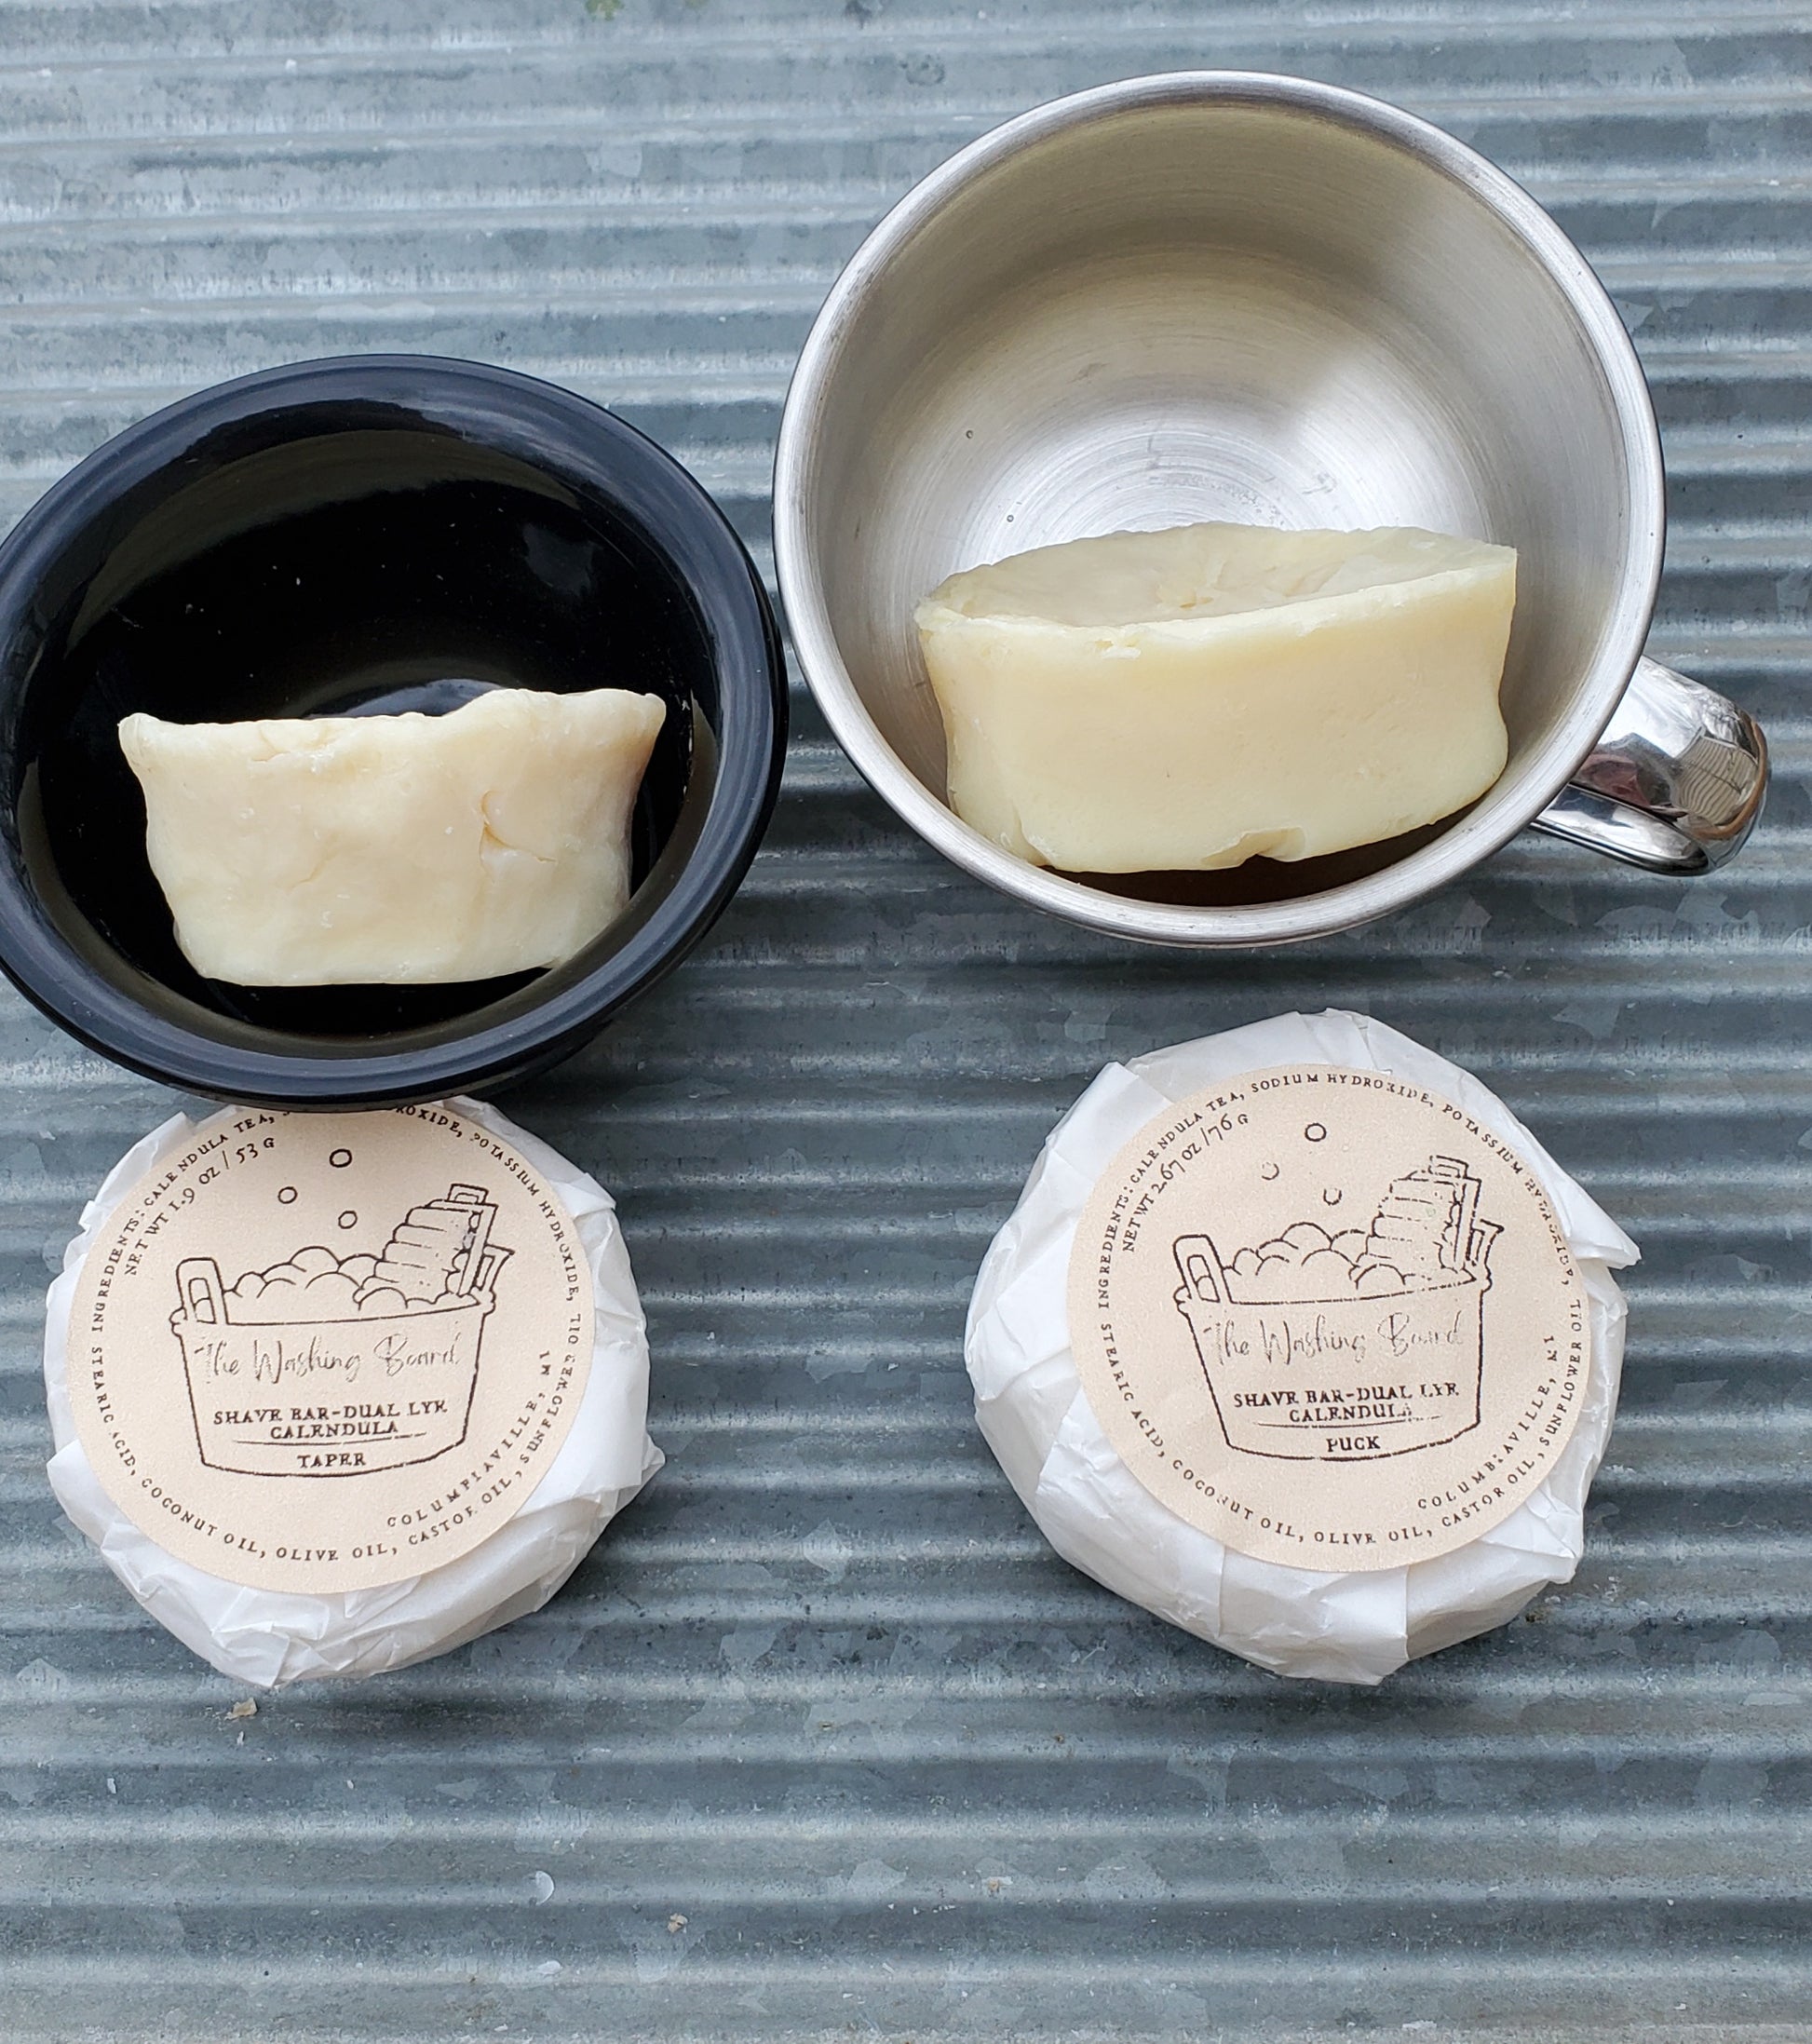 Dual Lye Shave Soaps,  "Naked" Taper on its side in the black bowl, "naked" Puck on its side in the stainless steel cup,  a Shave Brush, a wrapped taper and a wrapped puck.